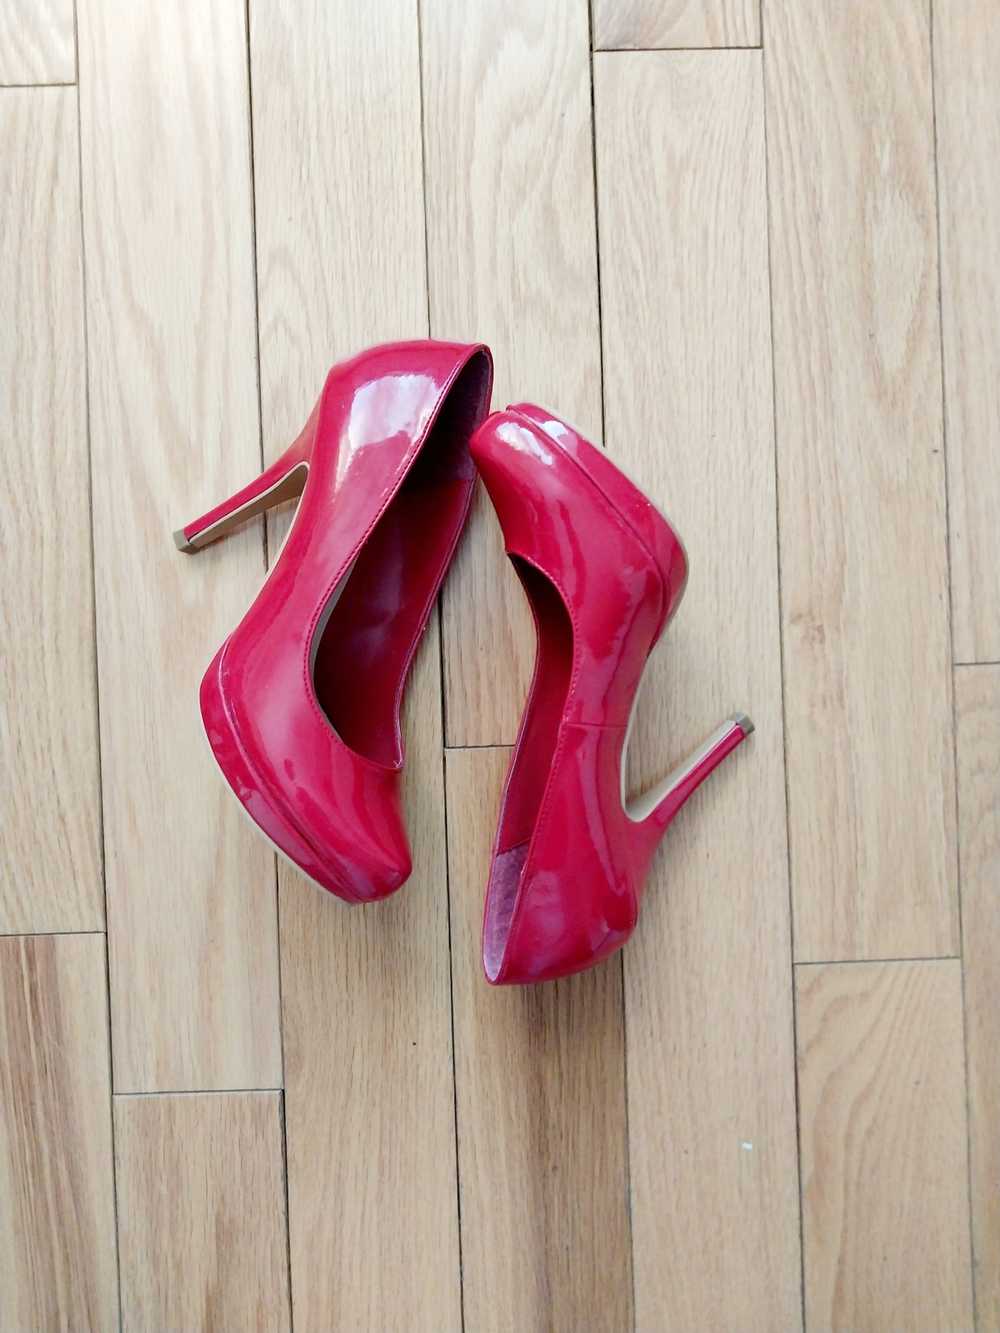 Call It Spring Call it Spring High Heels Red Pumps - image 2